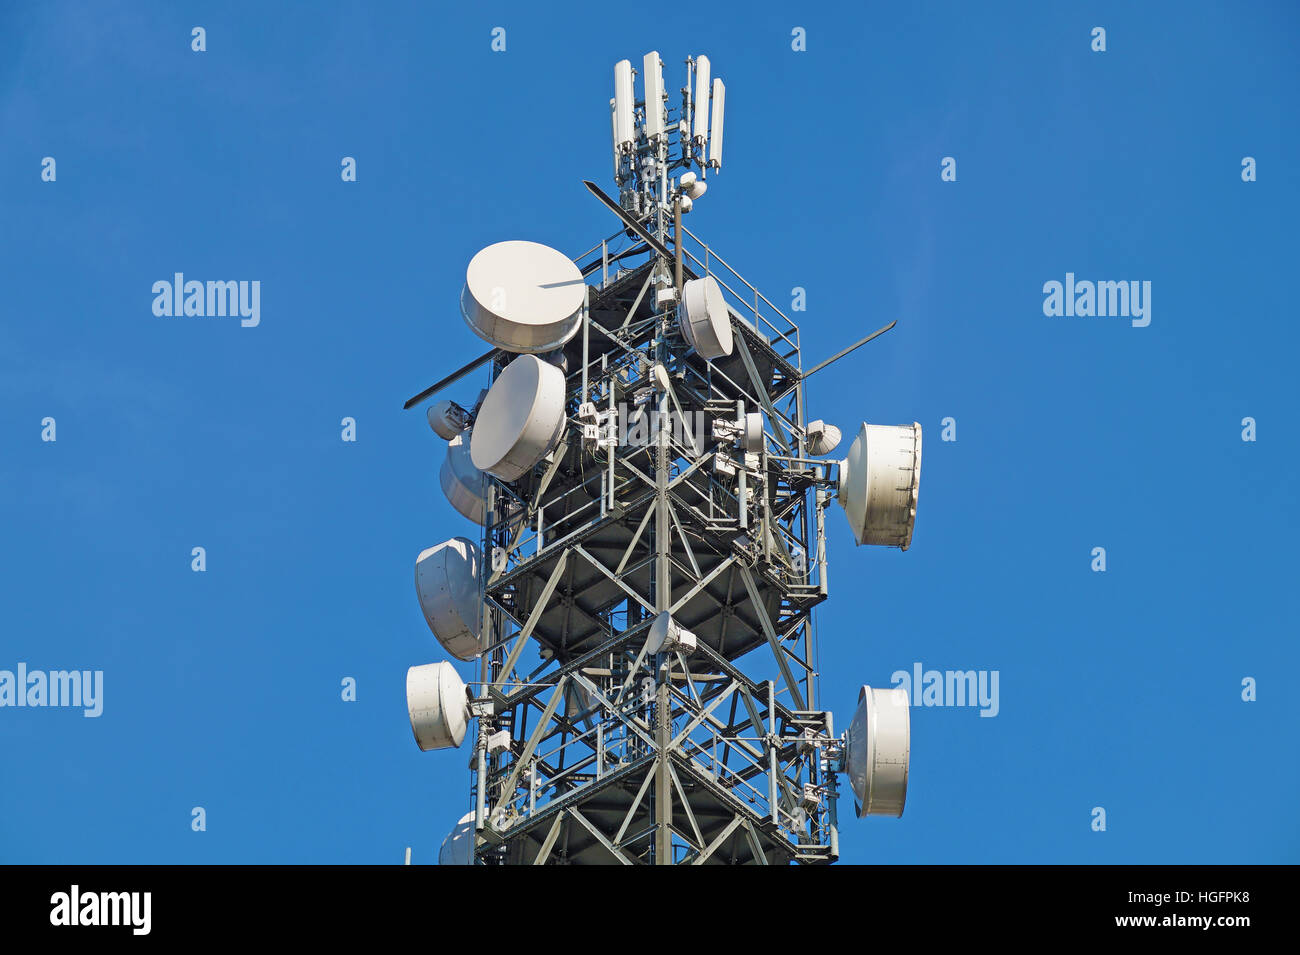 Telecommunication pole tower television antennas with blue sky Stock Photo